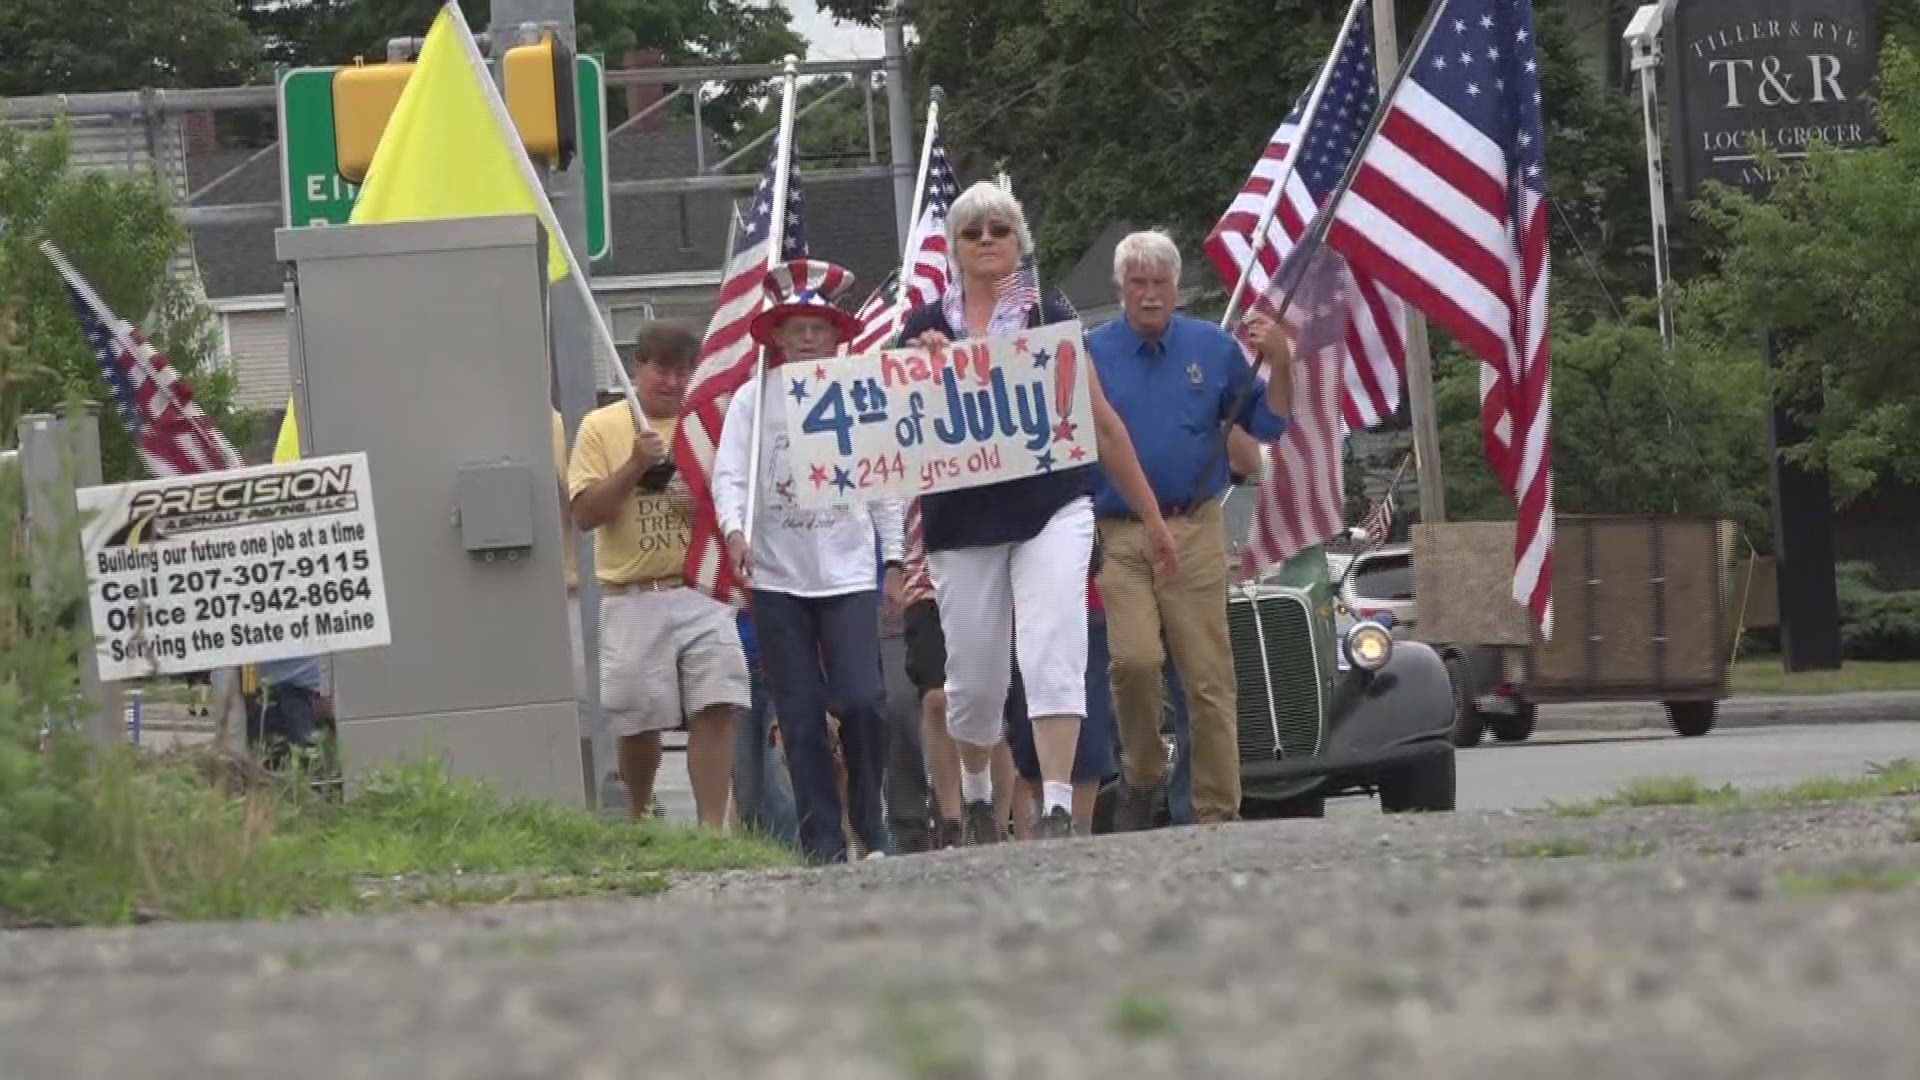 People still get out and enjoy the day during the Brewer, Maine 4th of July parade